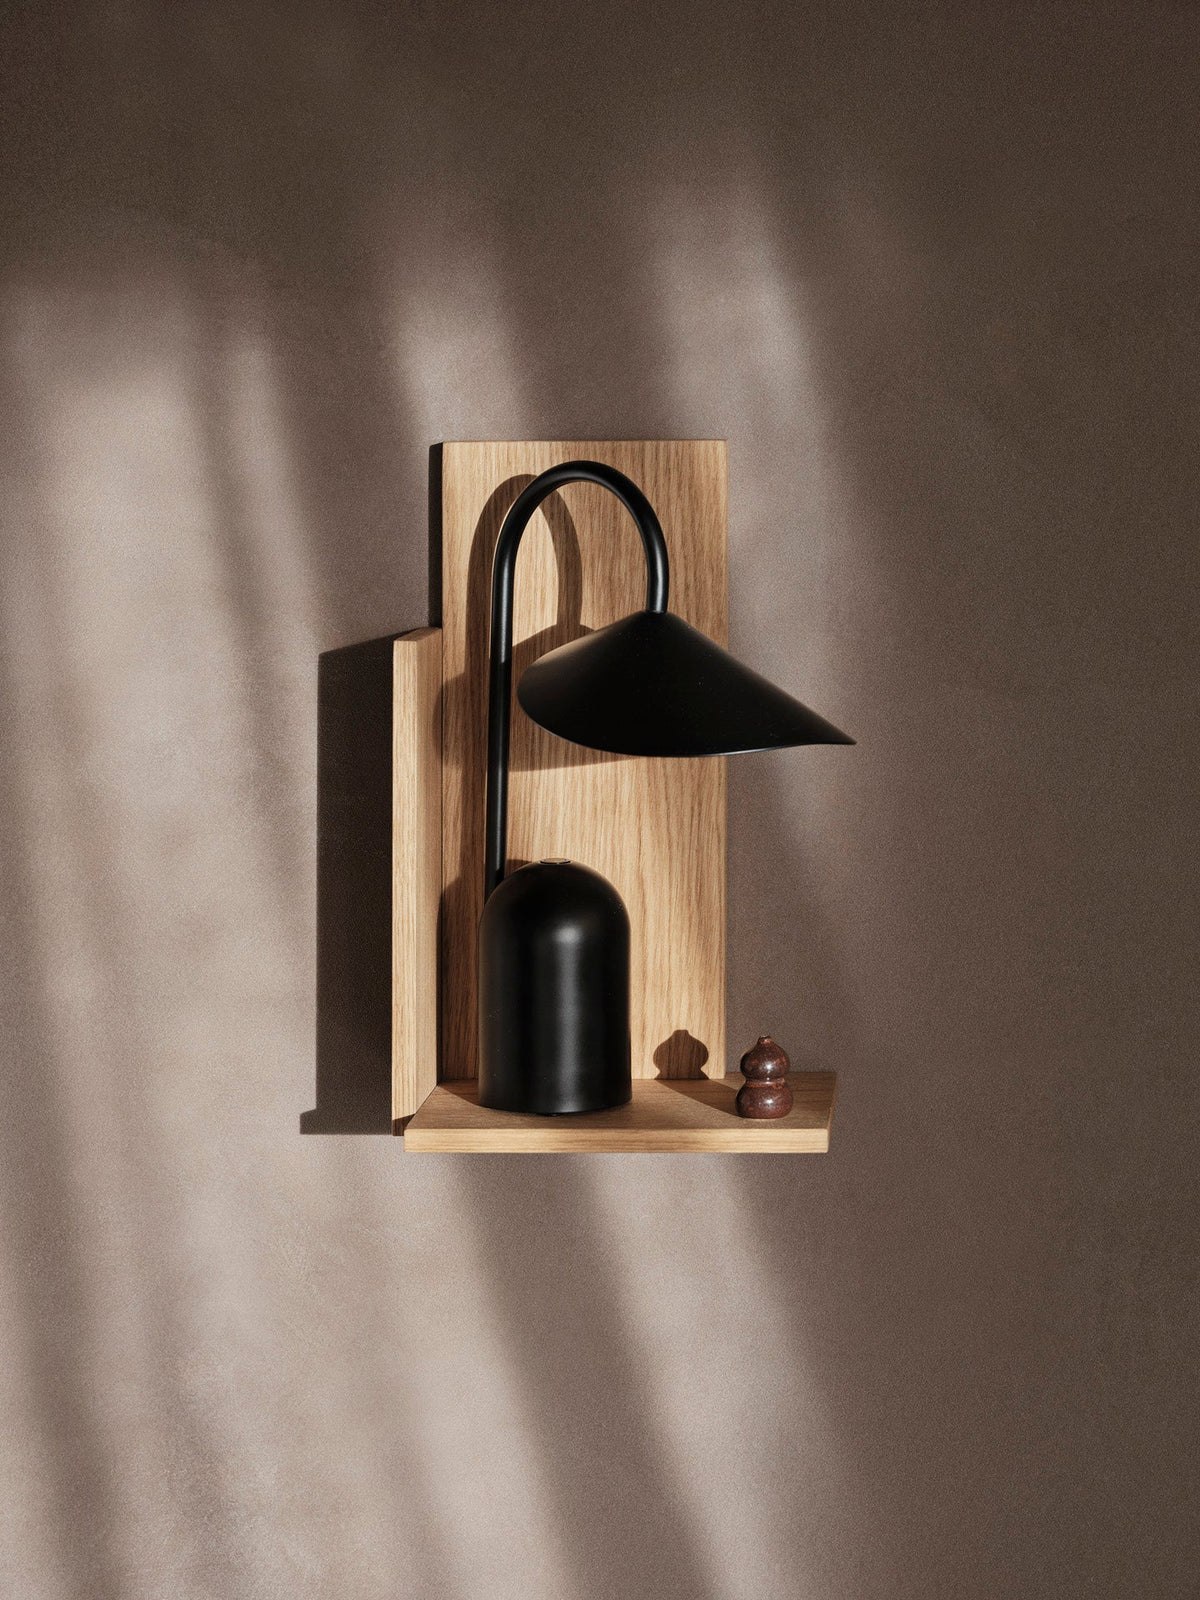 Stagger Shelf by Ferm Living